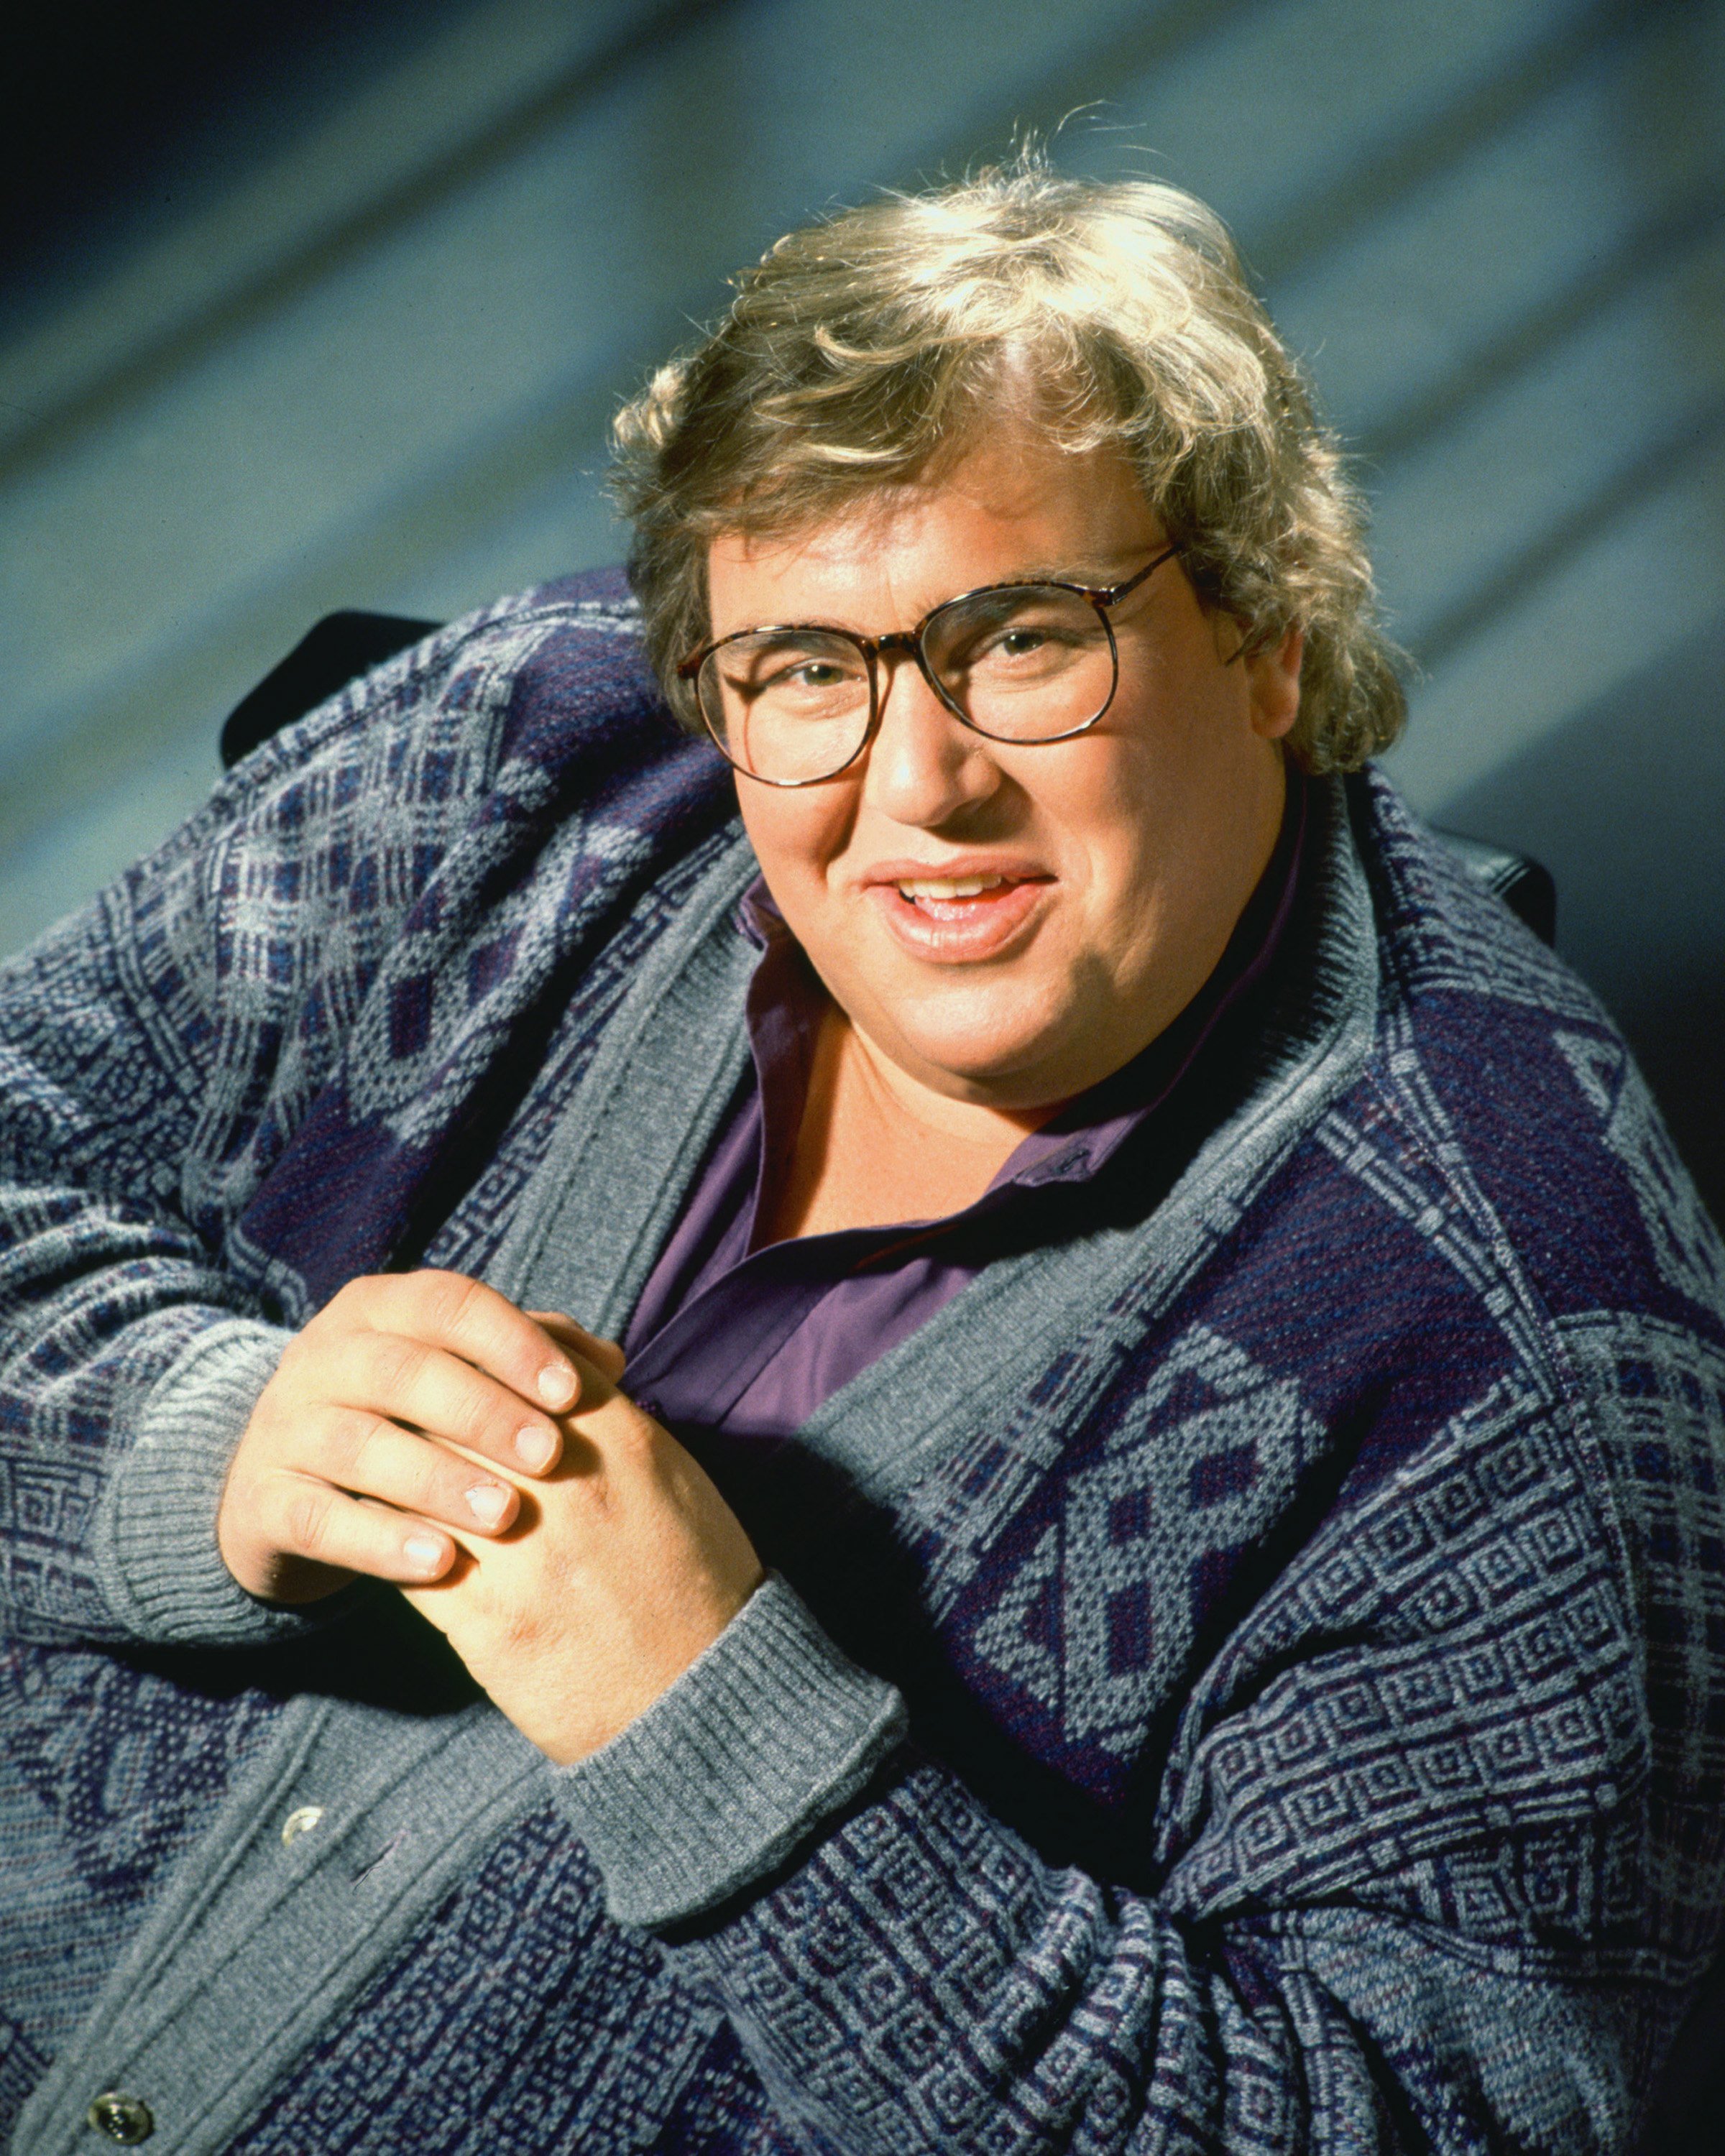 Actor John Candy posing for a photo session on April 12, 1993 in Los Angeles, California ┃ Source: Getty Images